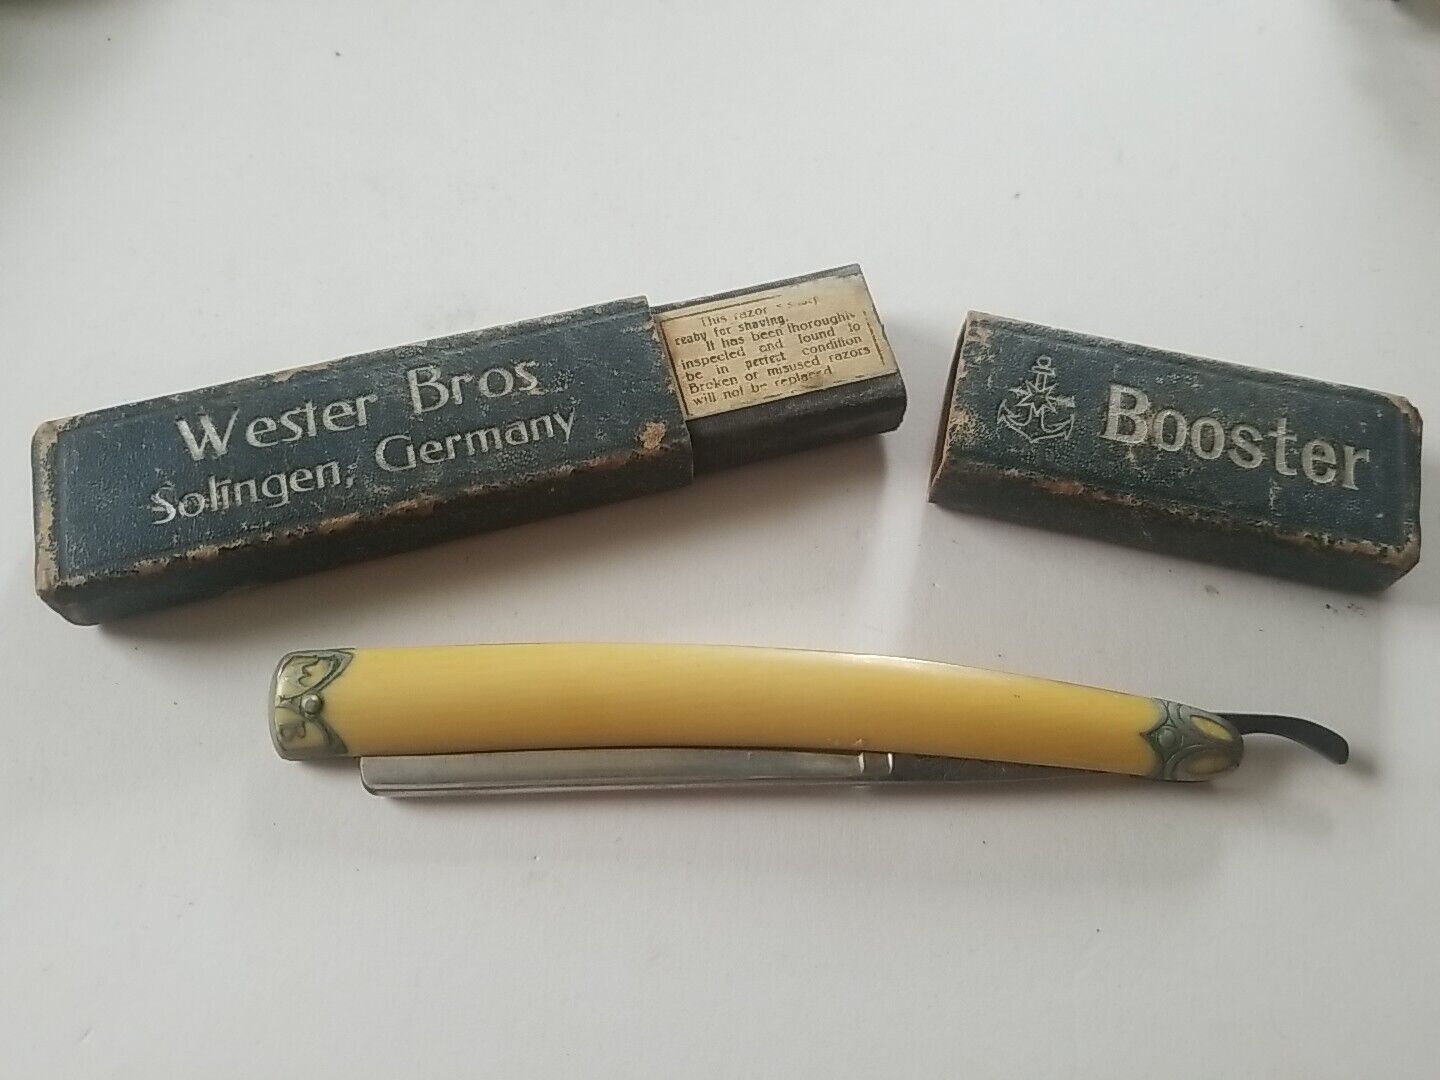 Vintage  Wester Bros Booster Straight Blade Razor Solingen Germany with box